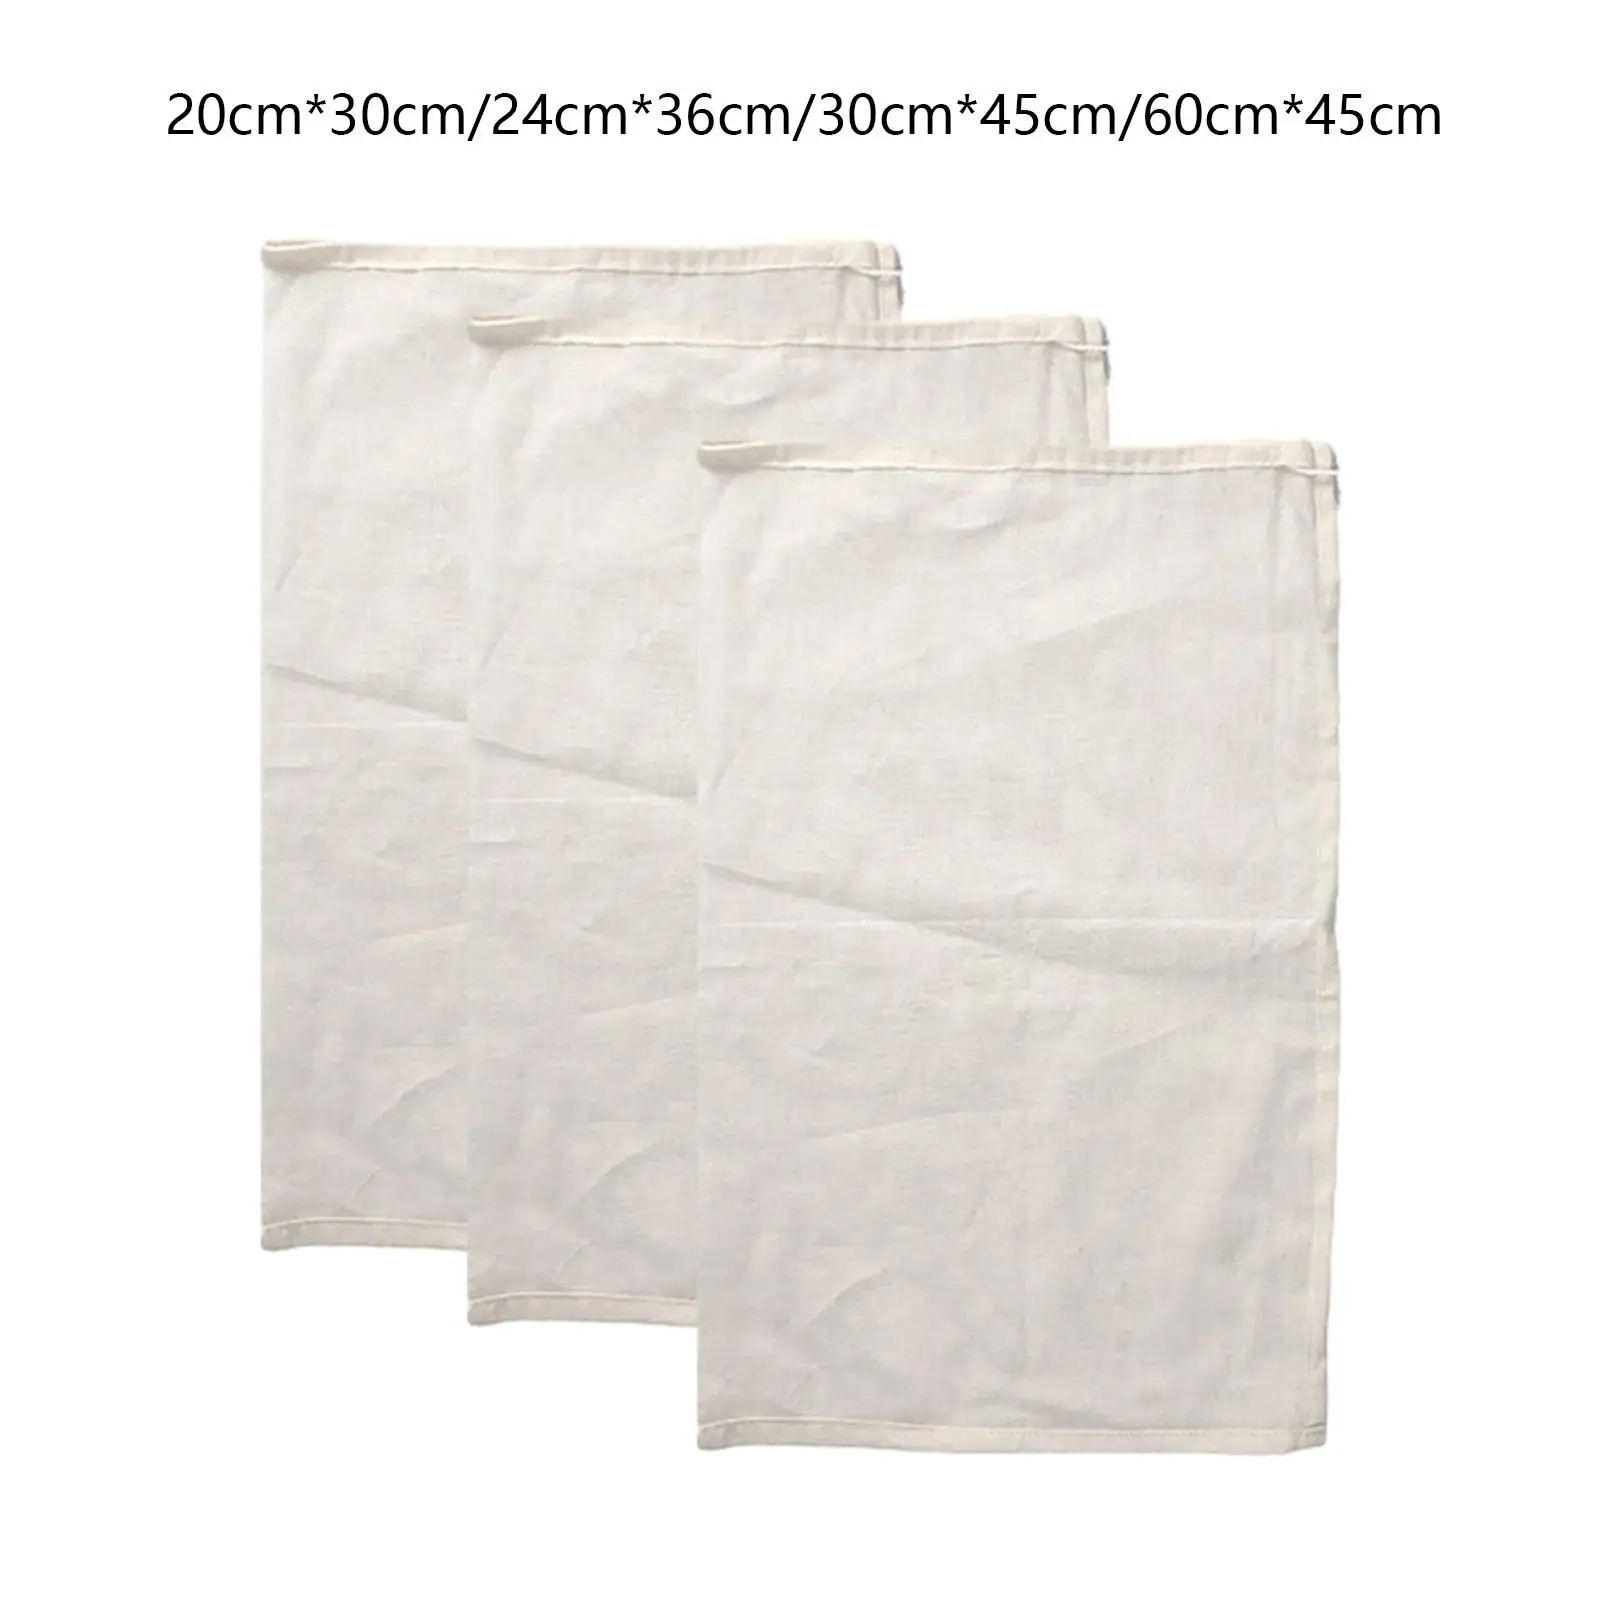 3x Cold Brew Coffee Bags Multipurpose Fine Mesh Cheesecloth Bags Muslin Drawstring Bags for Tea Bone Vegetables Spice Soy Milk